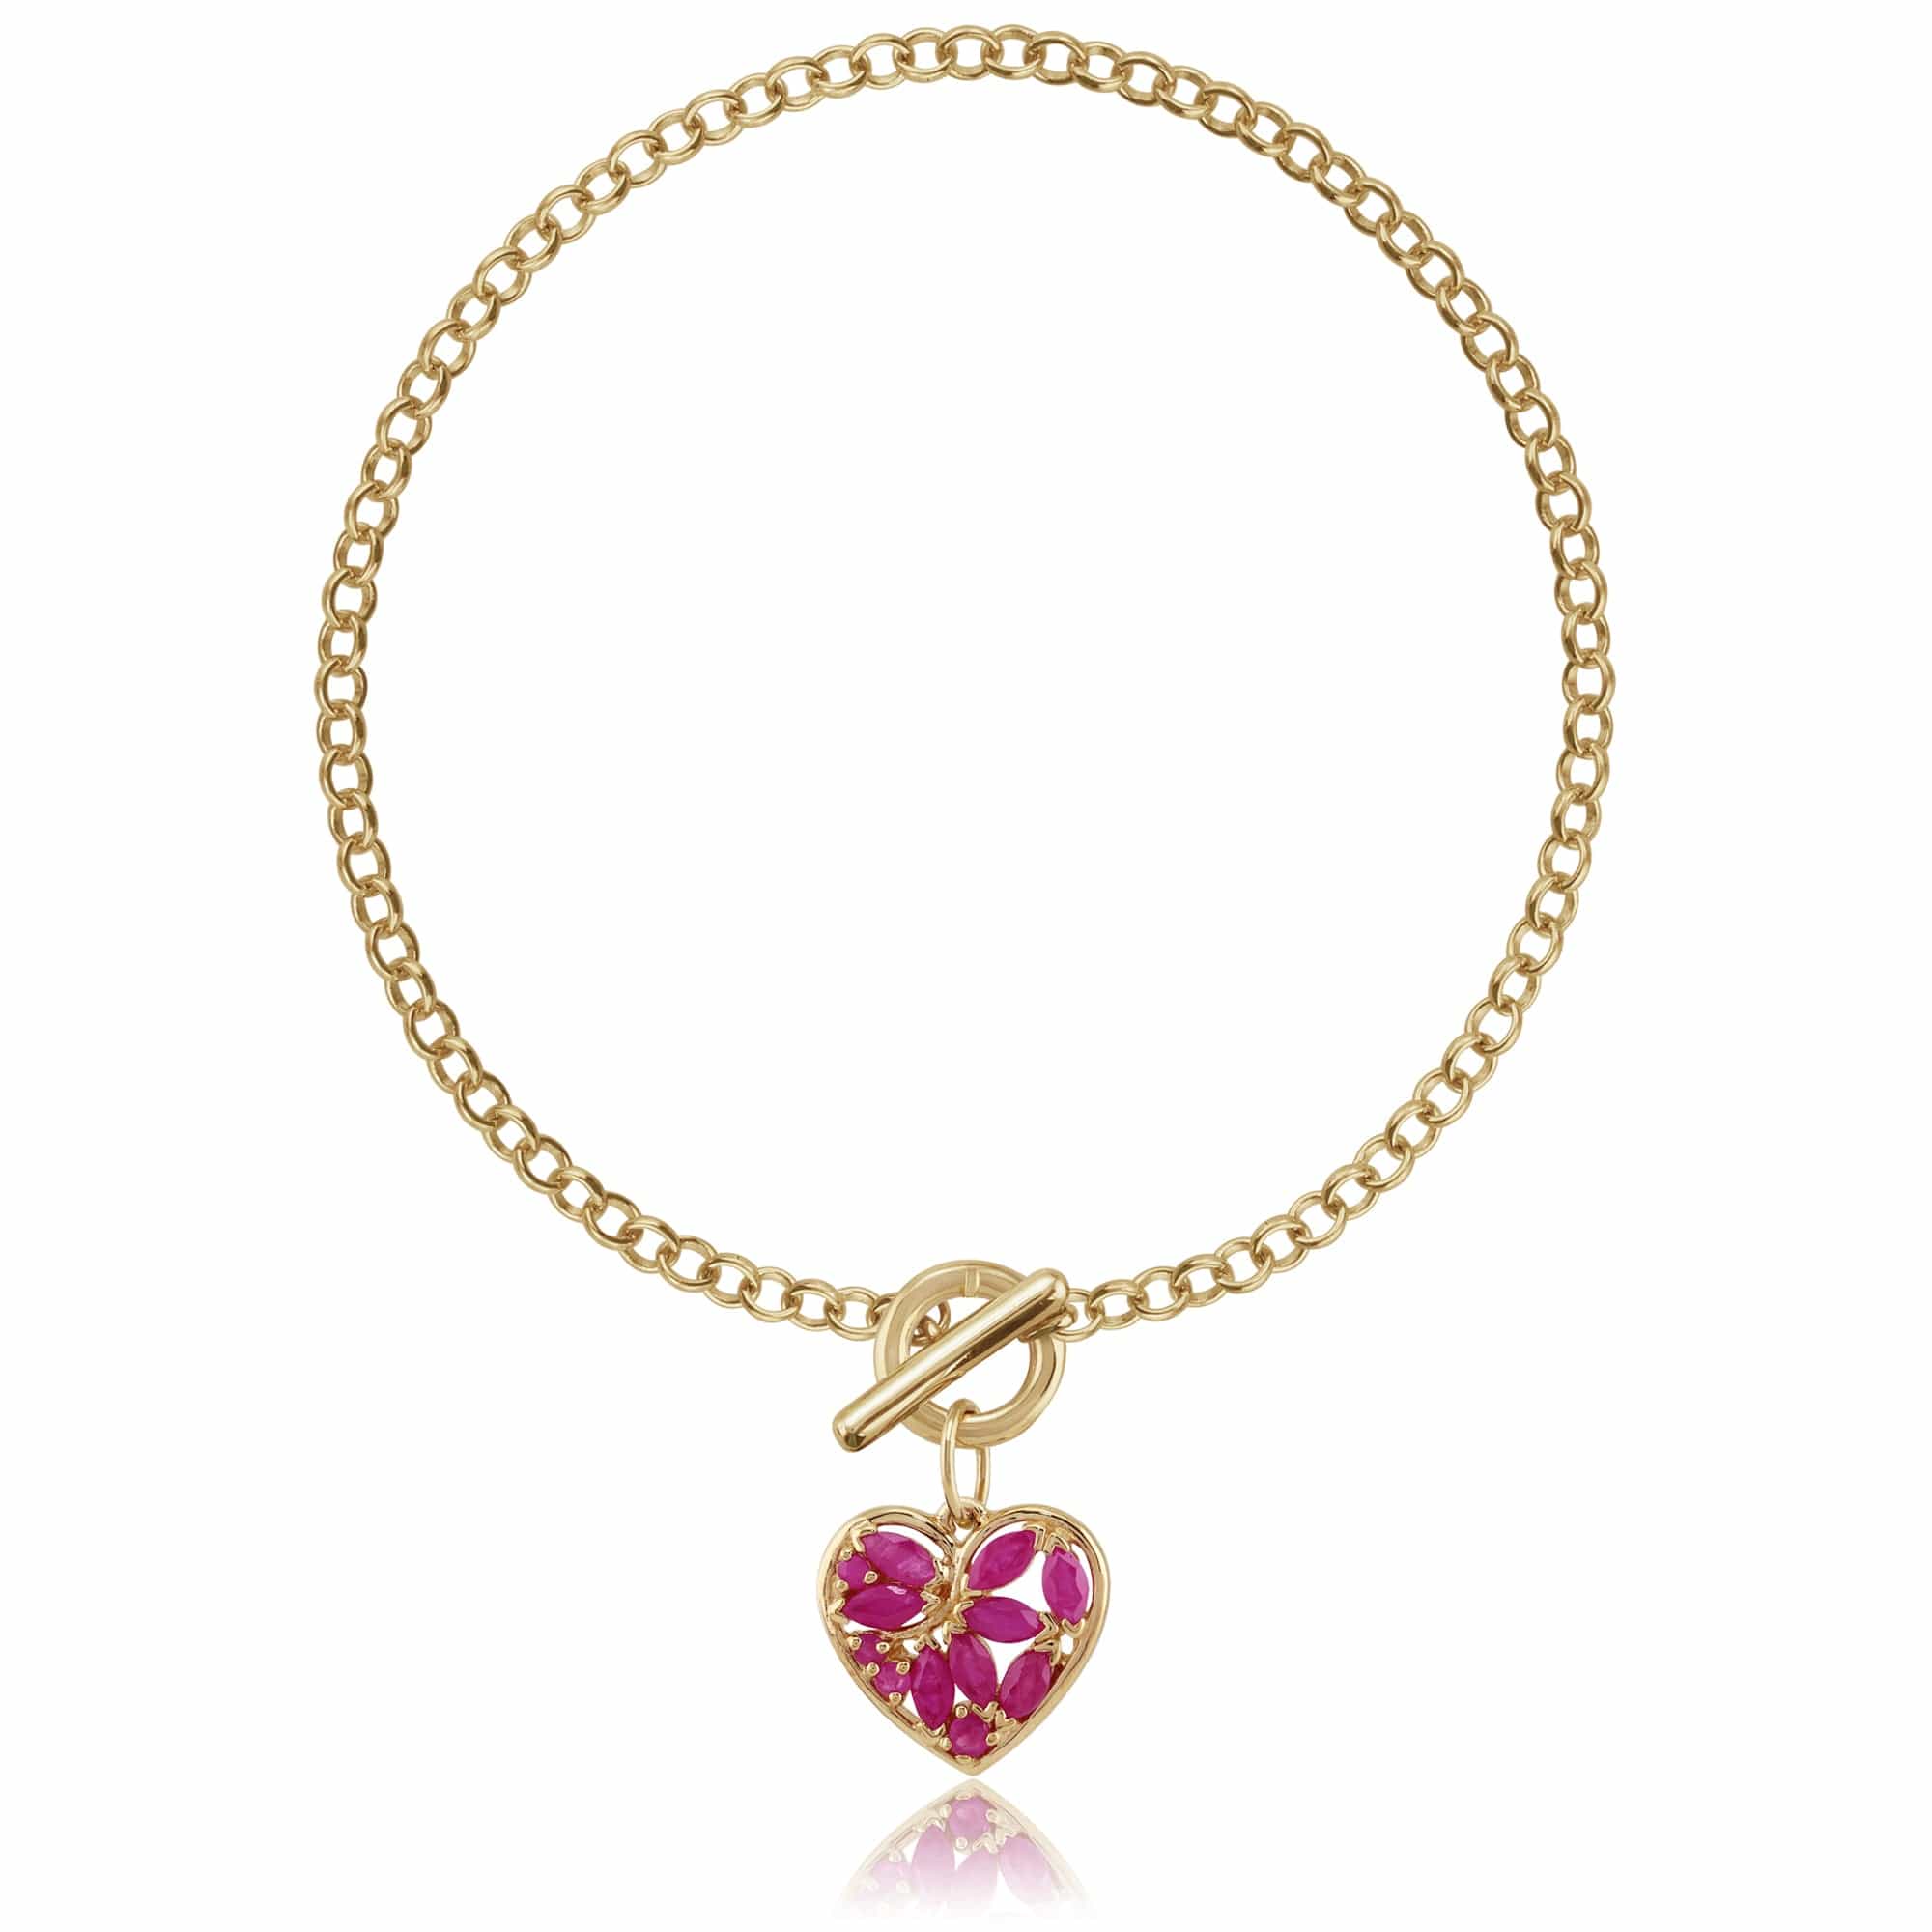 Gemondo Marquise Ruby Heart Charm T-Bar Bracelet in 9ct Yellow Gold